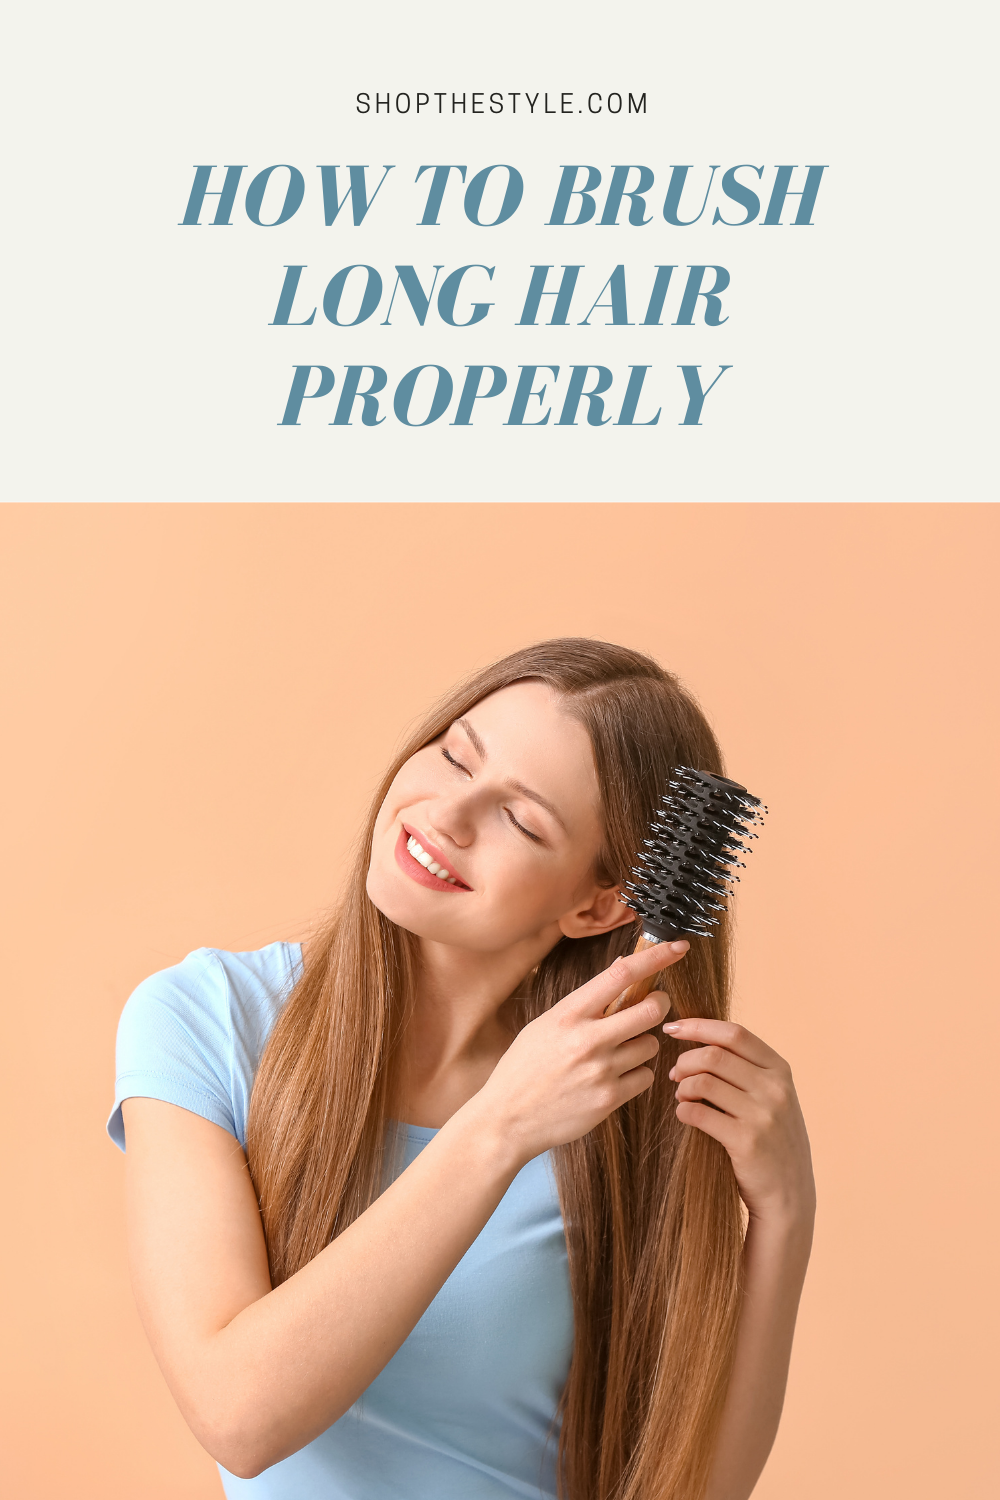 How To Brush Long Hair Properly